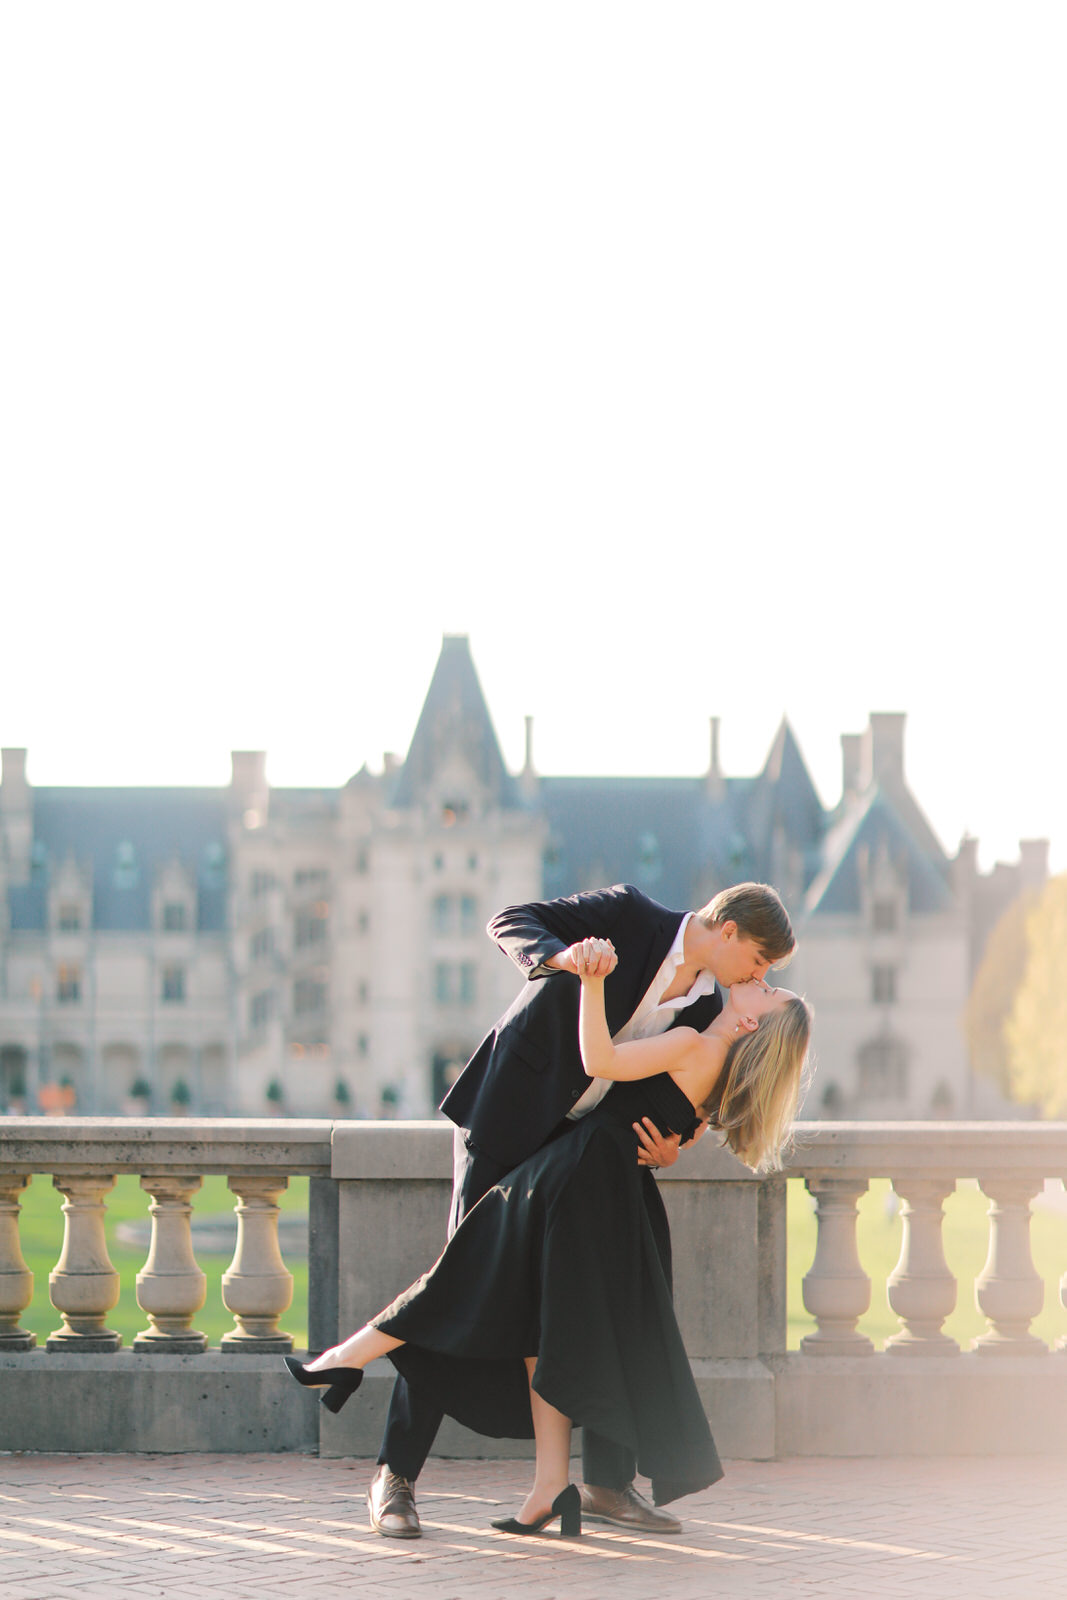 East Coast film wedding photographer captures a couple during their elegant engagement photography session at The Biltmore Estate.